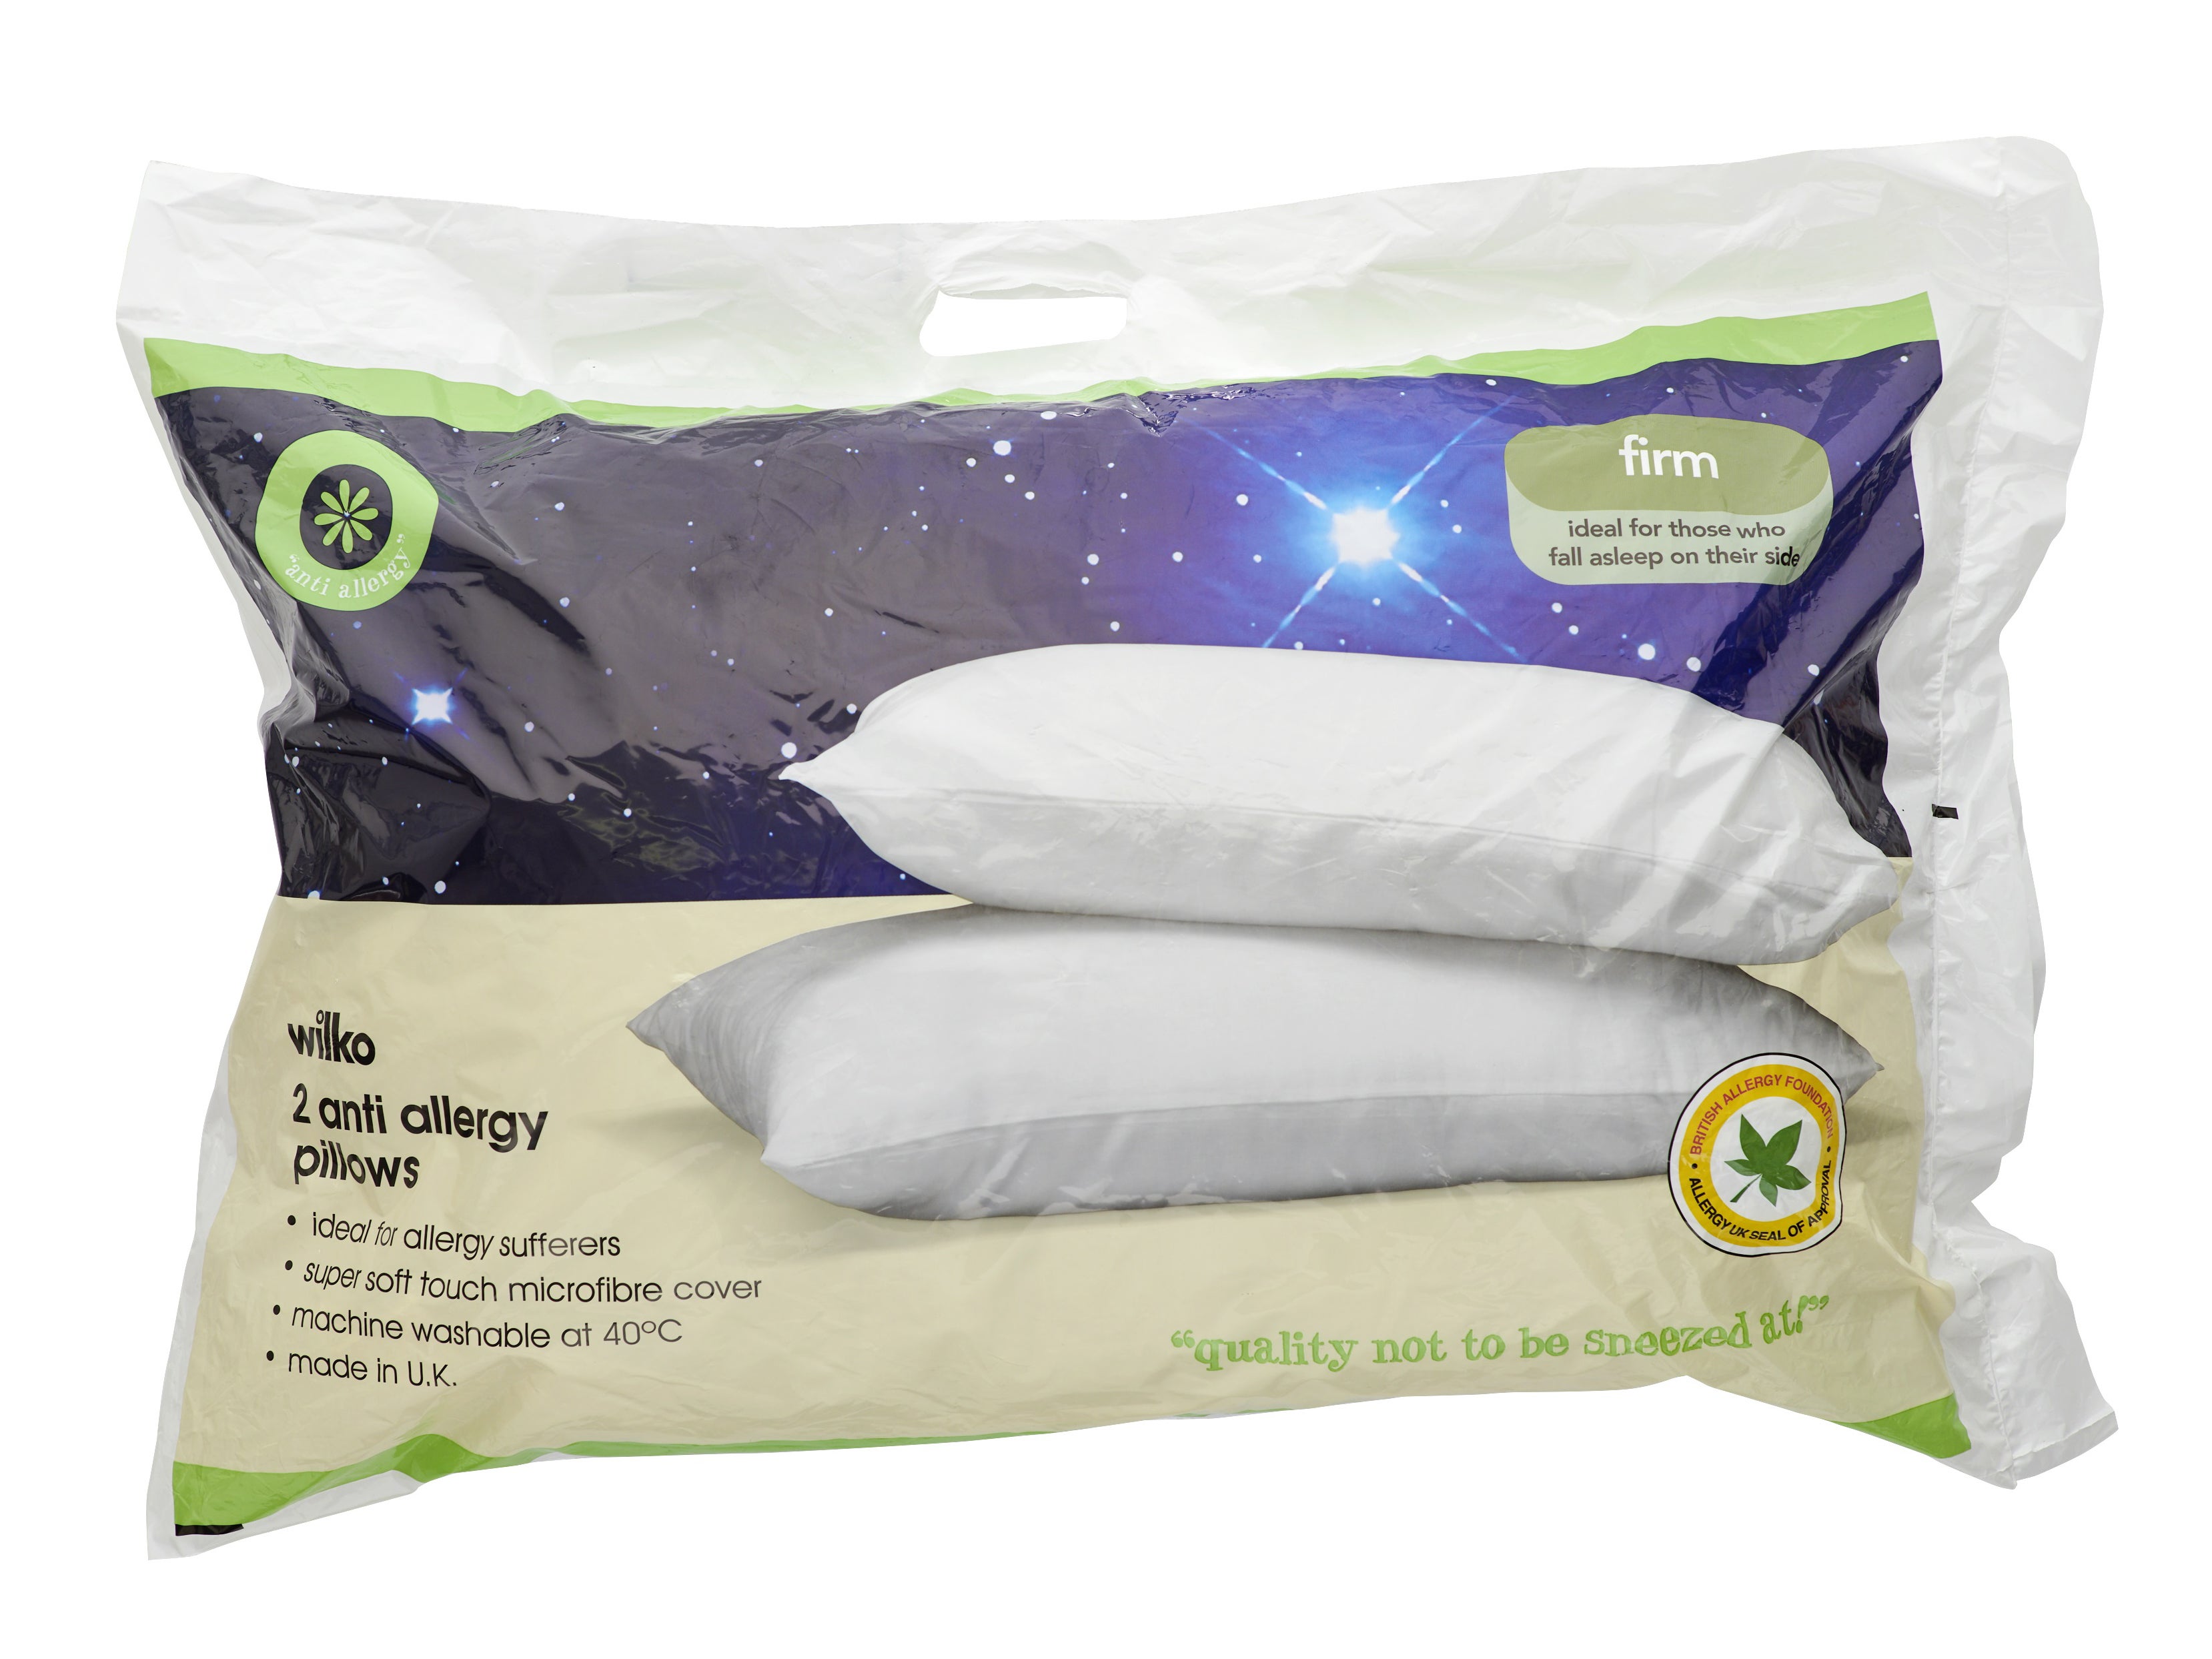 NightComfort Soft Support Front Sleeper Pillow Soft Touch Anti Allergy Cover 